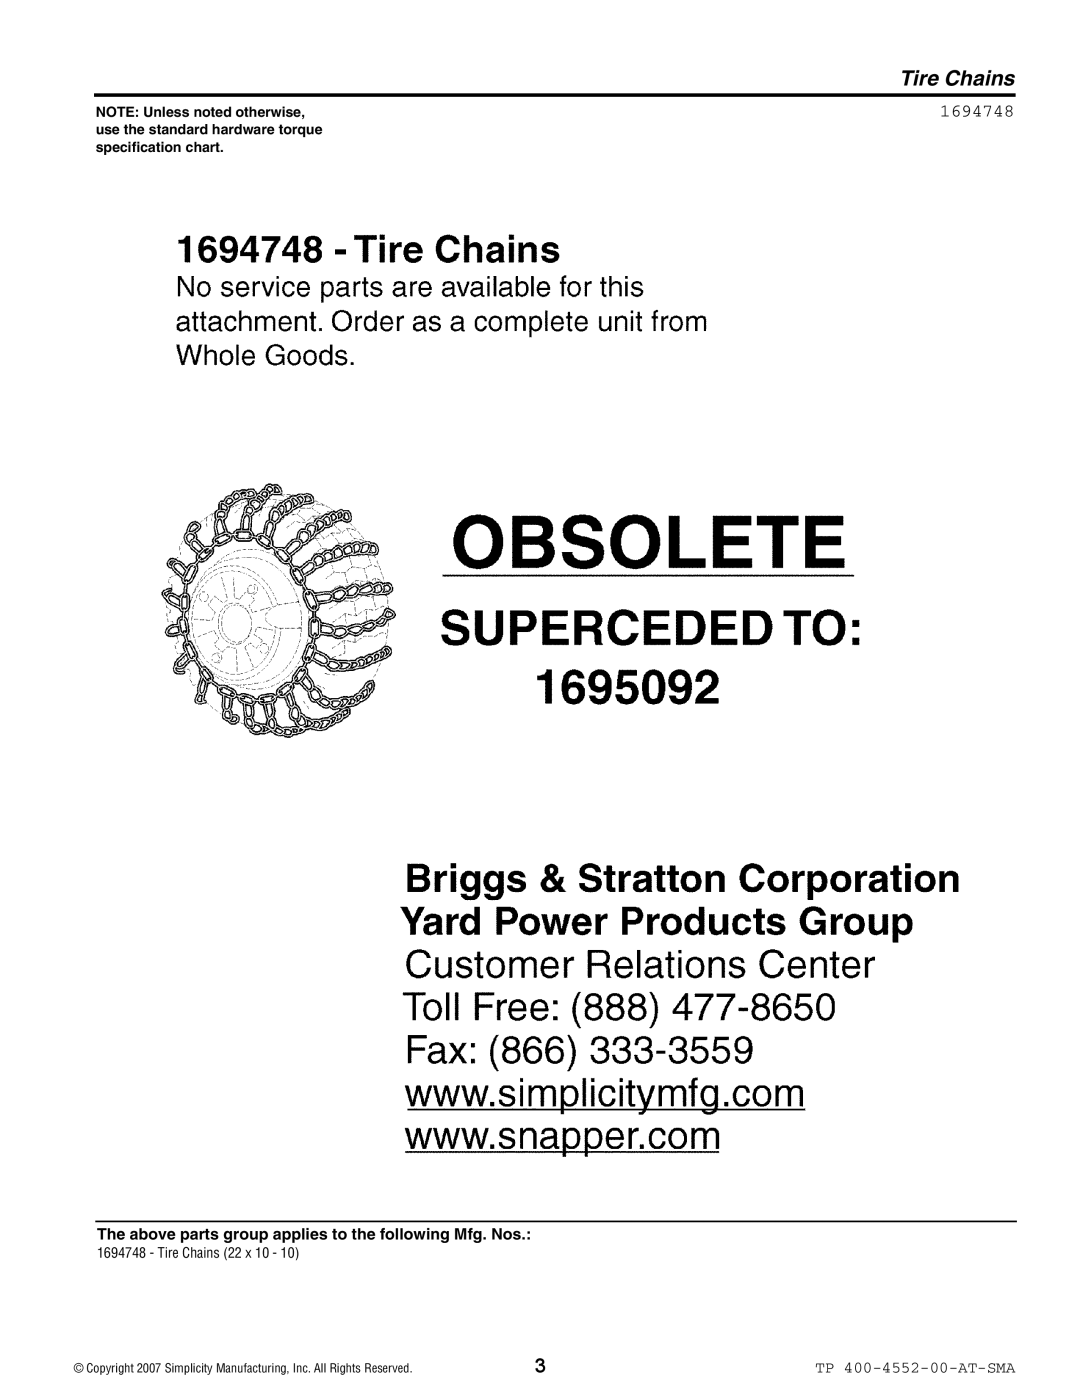 Snapper 4552 Tire Chains, NOTE Unless noted otherwise, use the standard hardware torque, specification chart, 1694748 